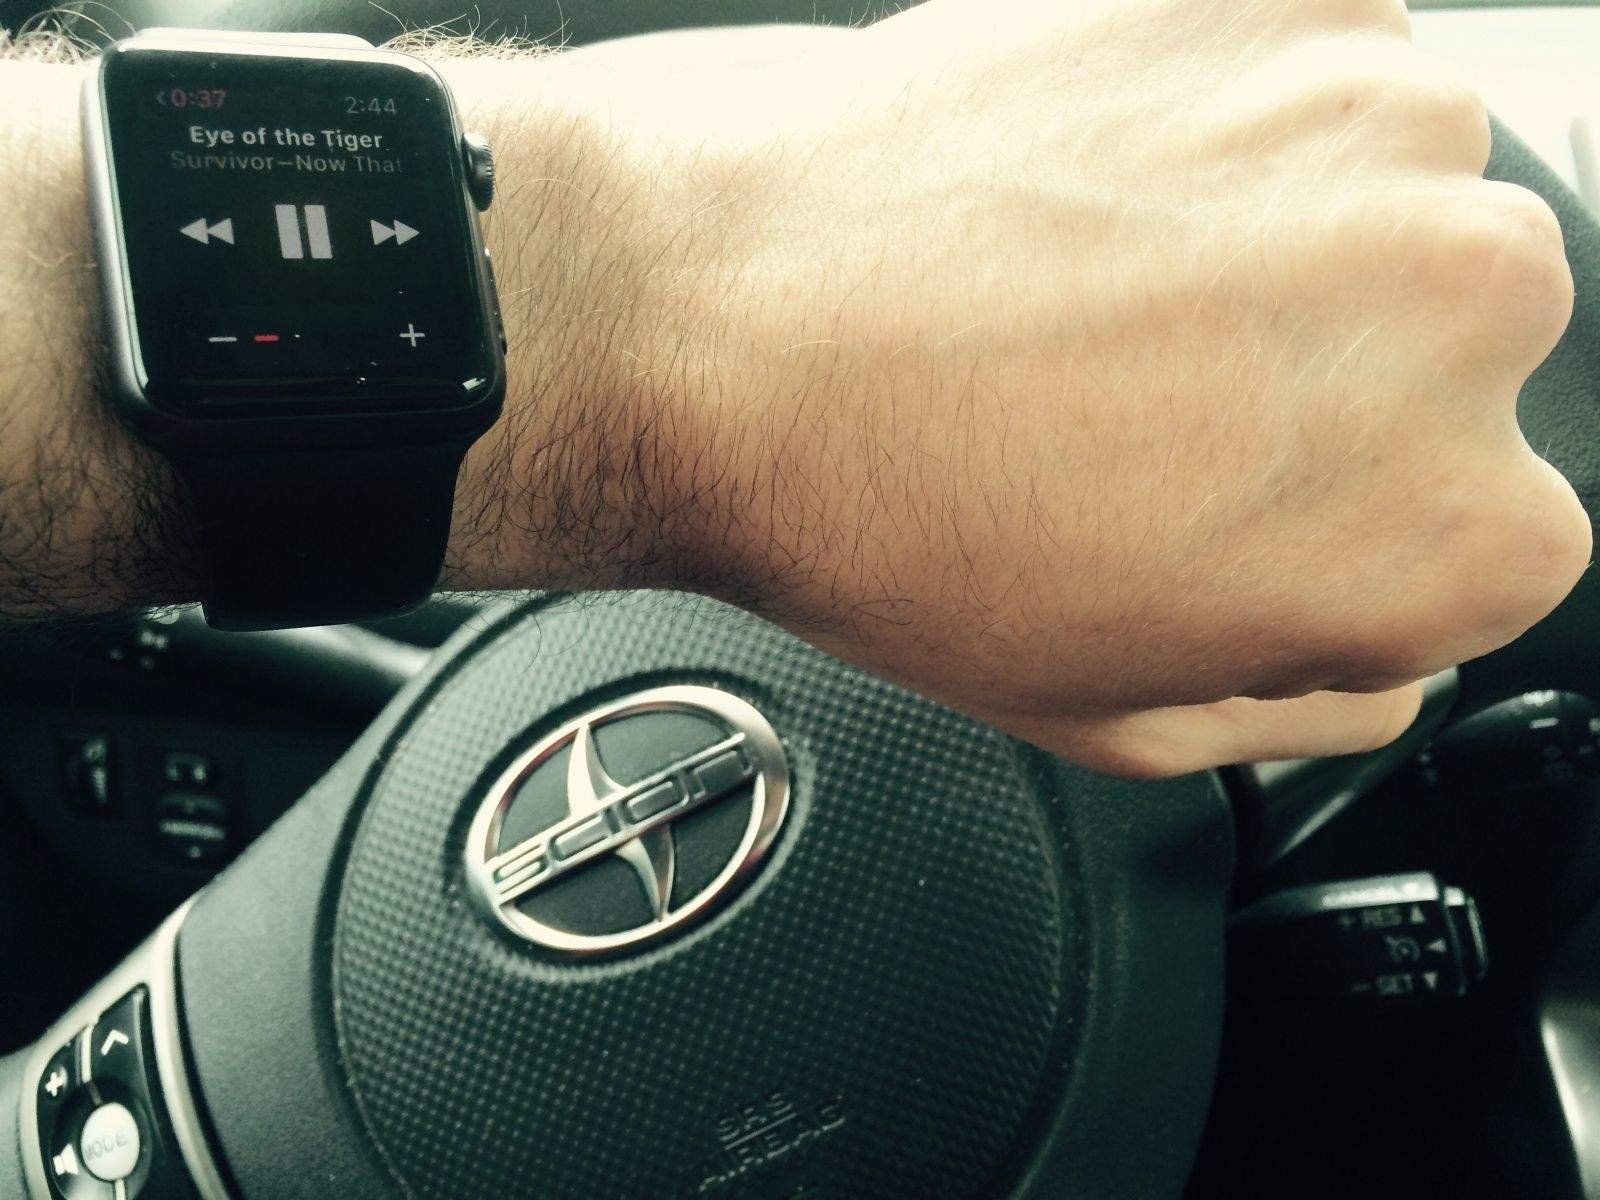 Apple Watch while driving